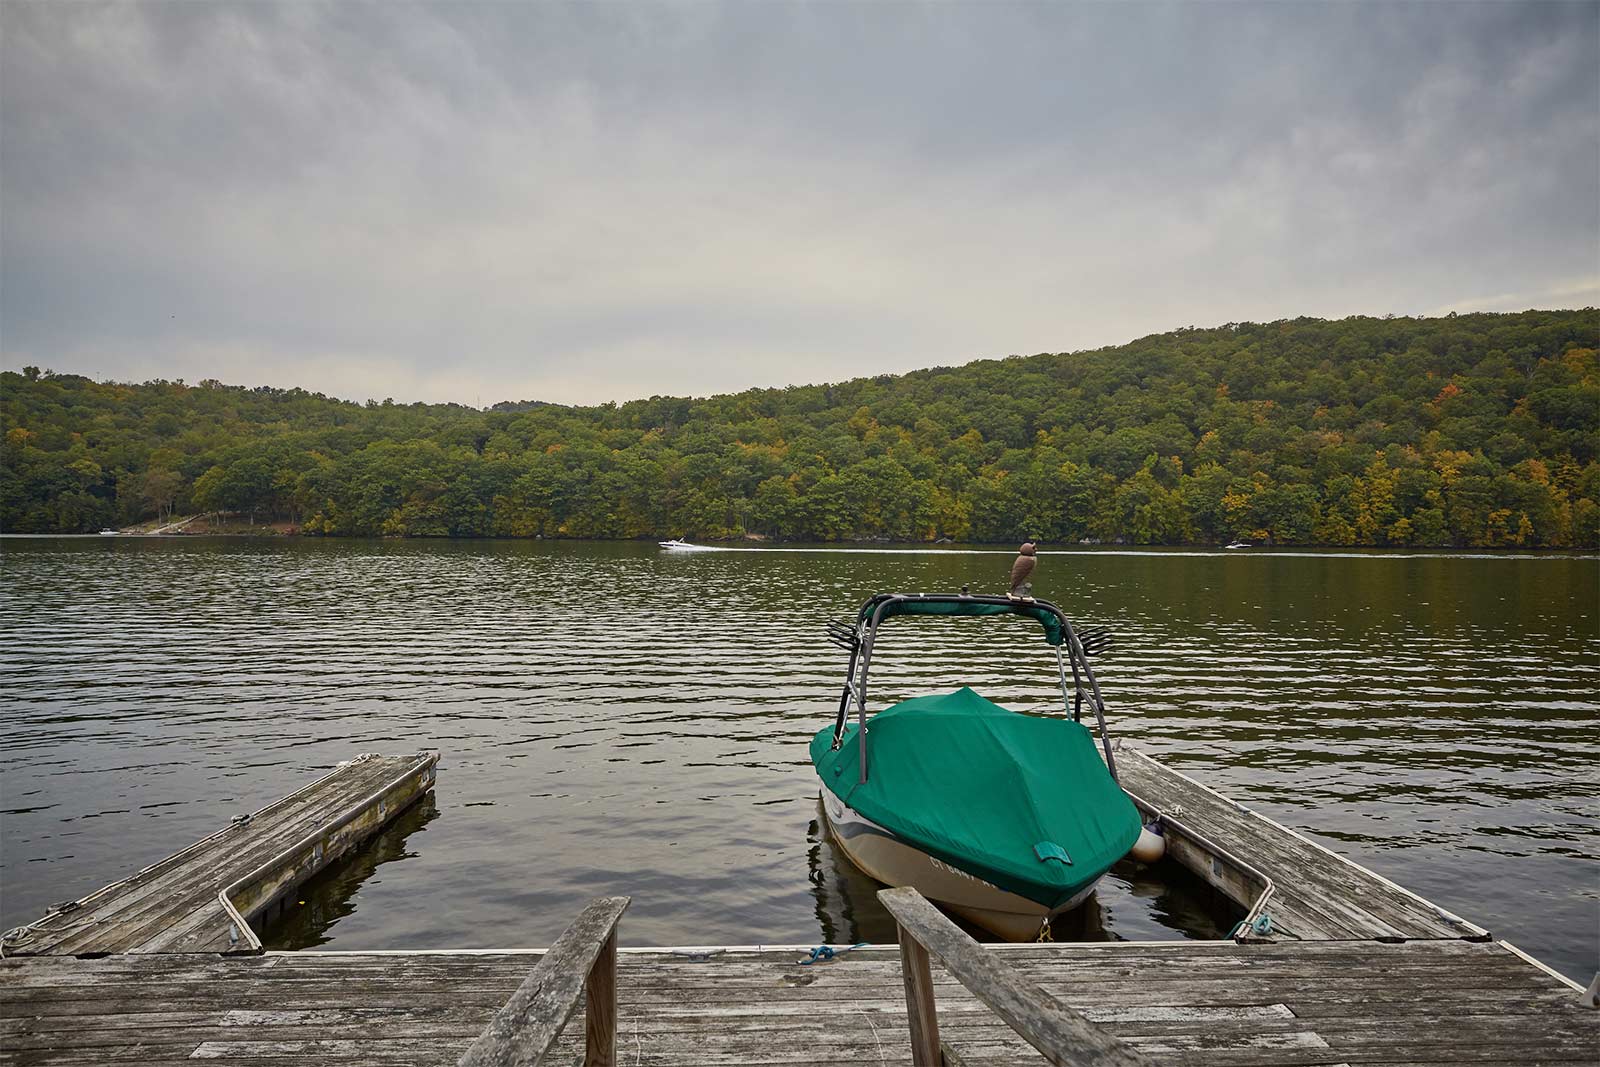 candlewood lake ©2020 by bret wills